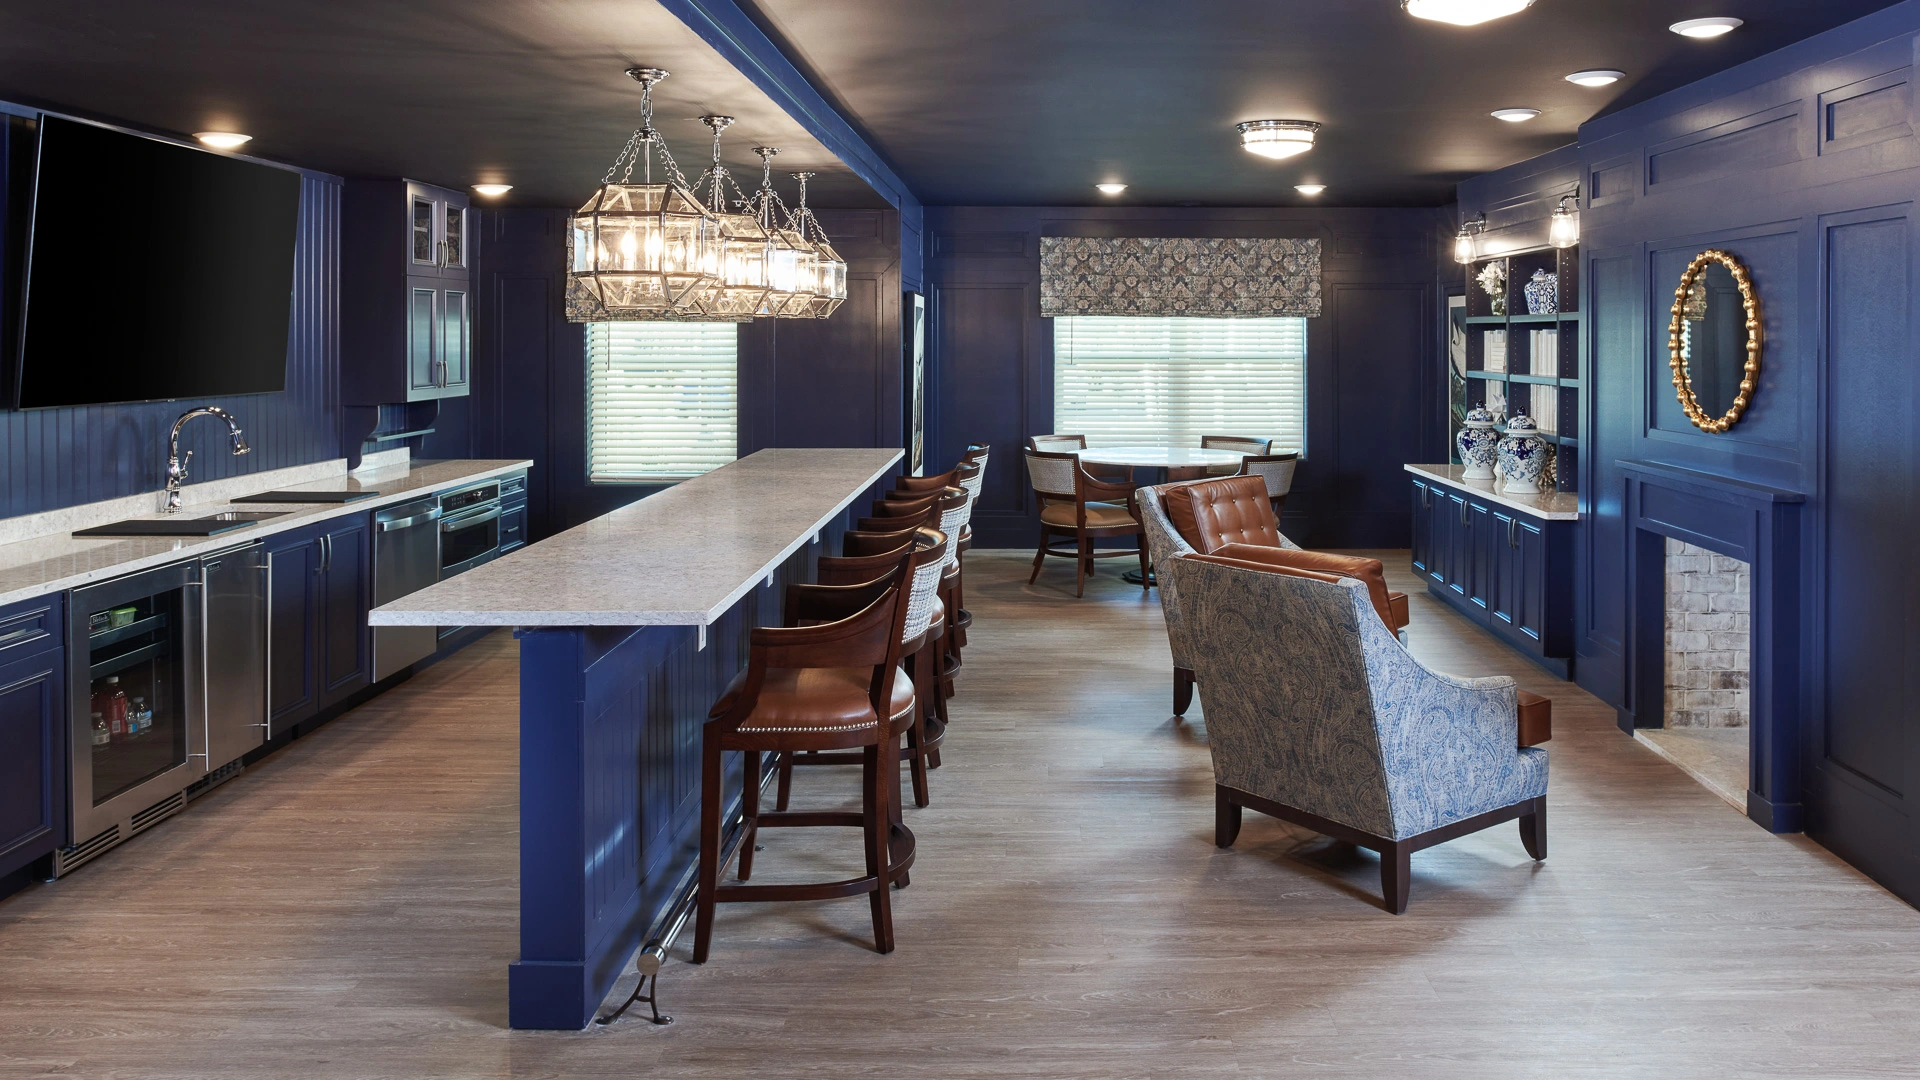 A bar and bistro at a retirement home in Bloomfield Hills, MI